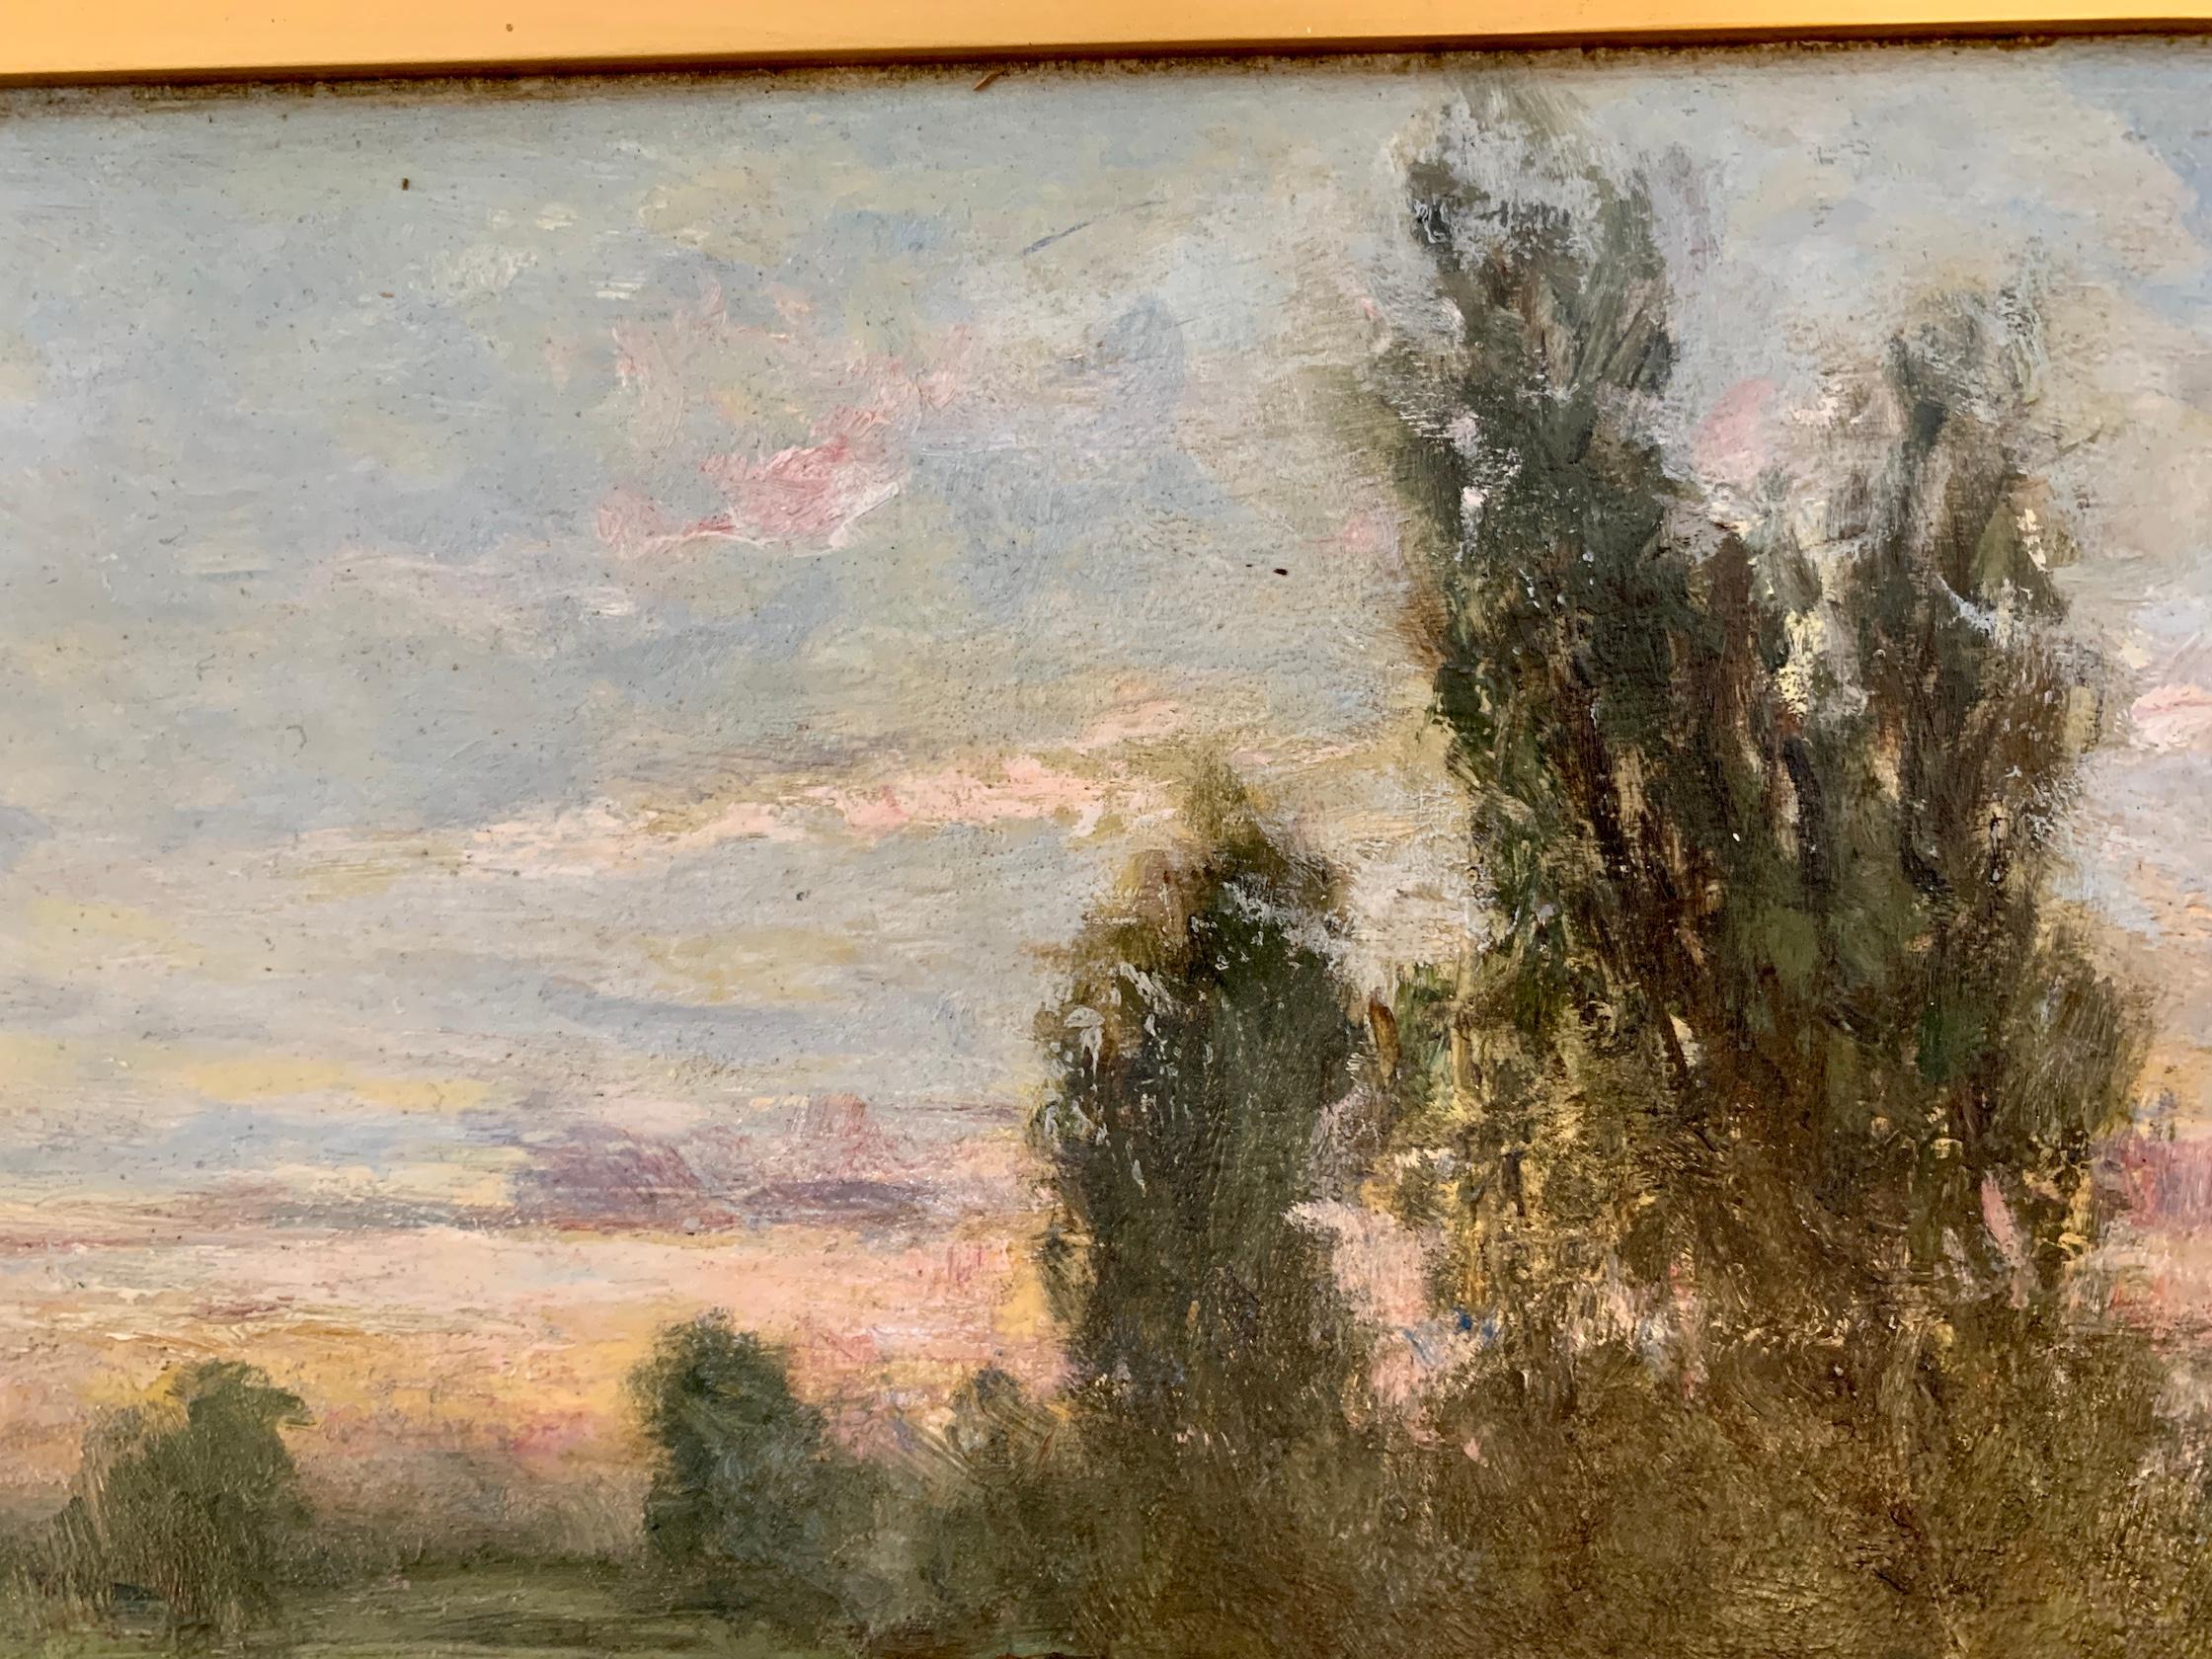 French impressionist landscape, Barbizon forest, with river and cows at Sunset
George Boyle was a pioneering 19th-century British artist inspired by European Impressionist painters.

The influence of the French Barbizon school is very evident in his